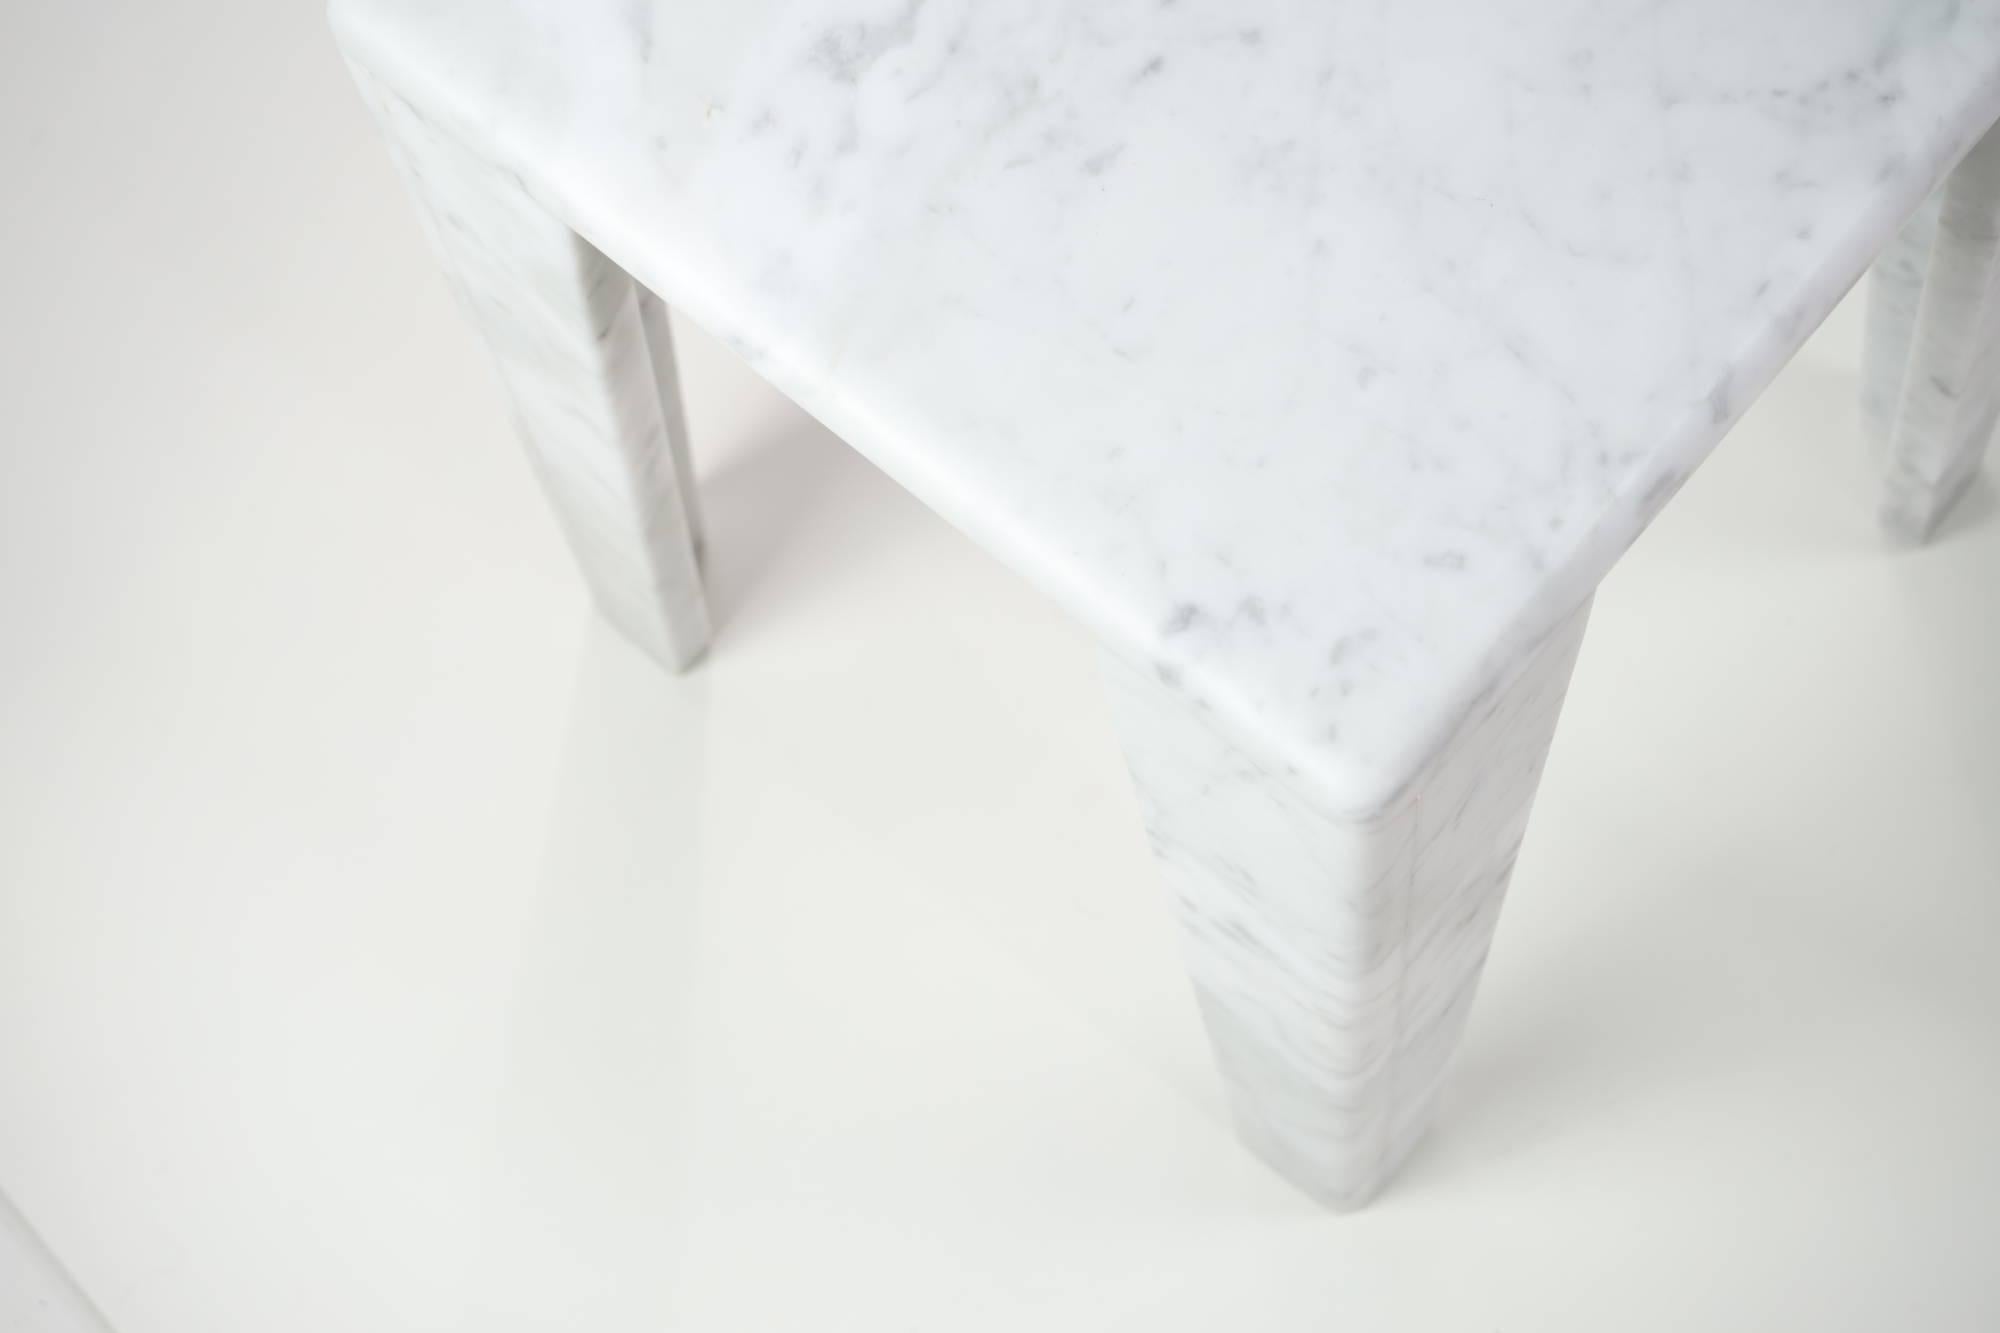 Avior is an evolution of the Gravity side table. We decided to keep the same concept of lightness and movement, abstracting the motion of the flying Carrara marble into a different 3D iron structure. 

The geometry was achieved through playful